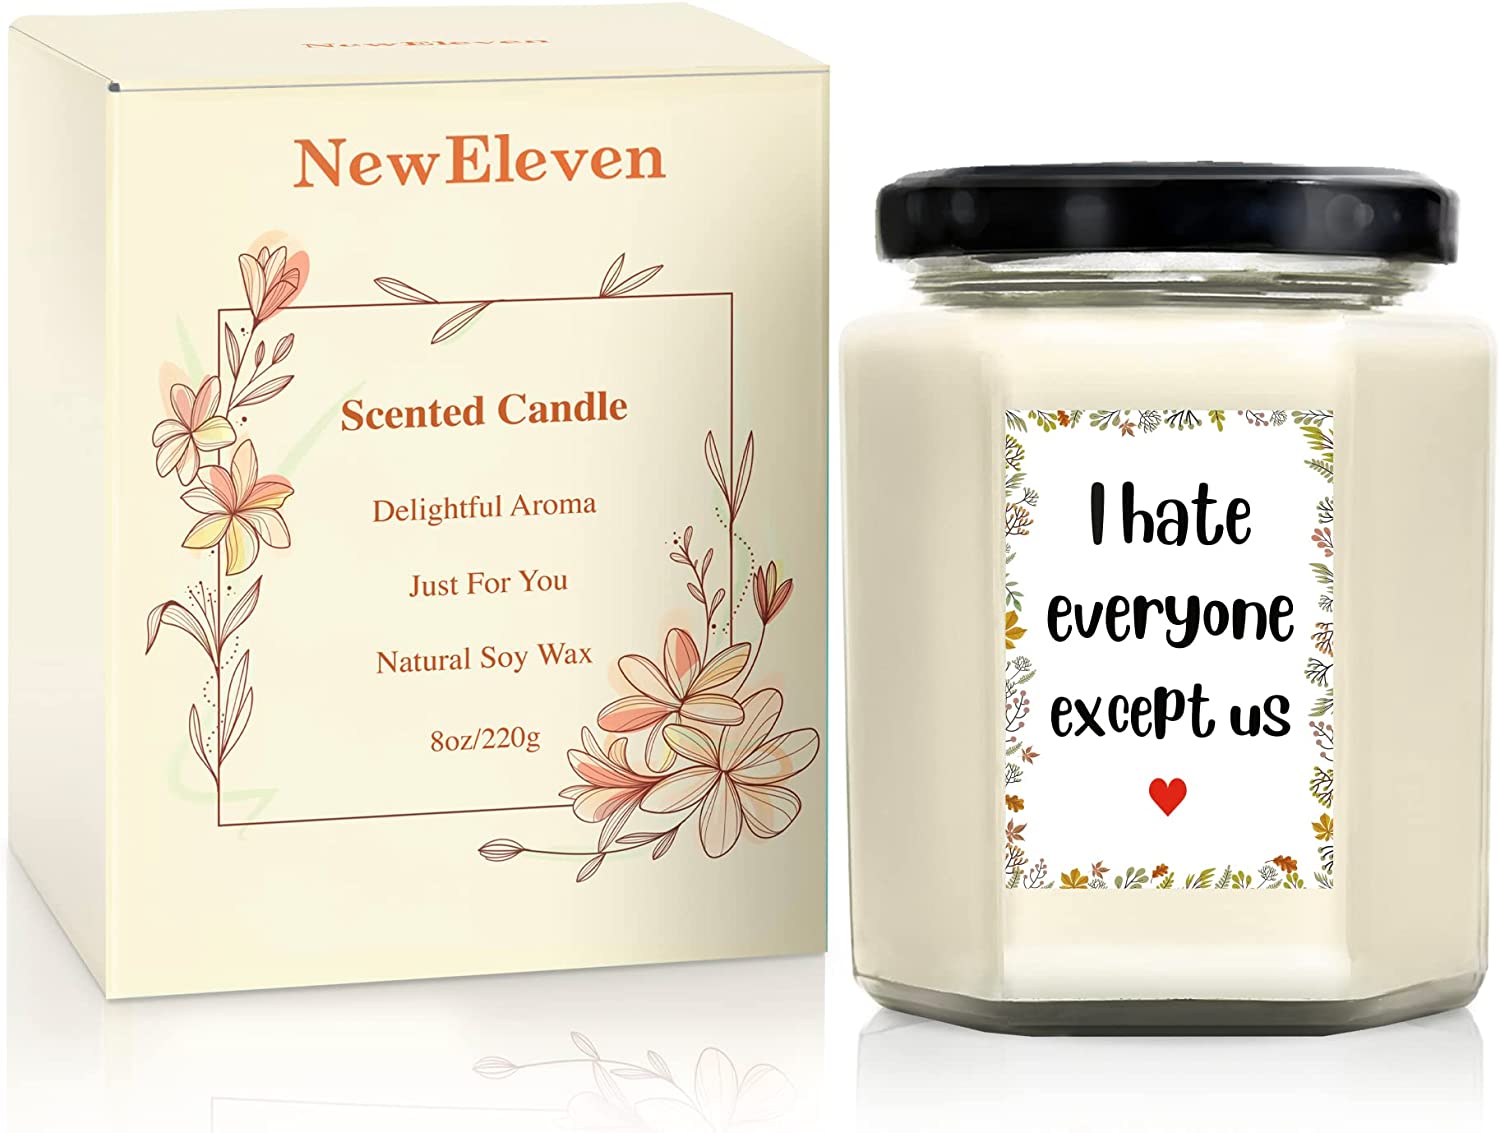 I Hate Everyone Except Us - Lavender Candle 8 Oz